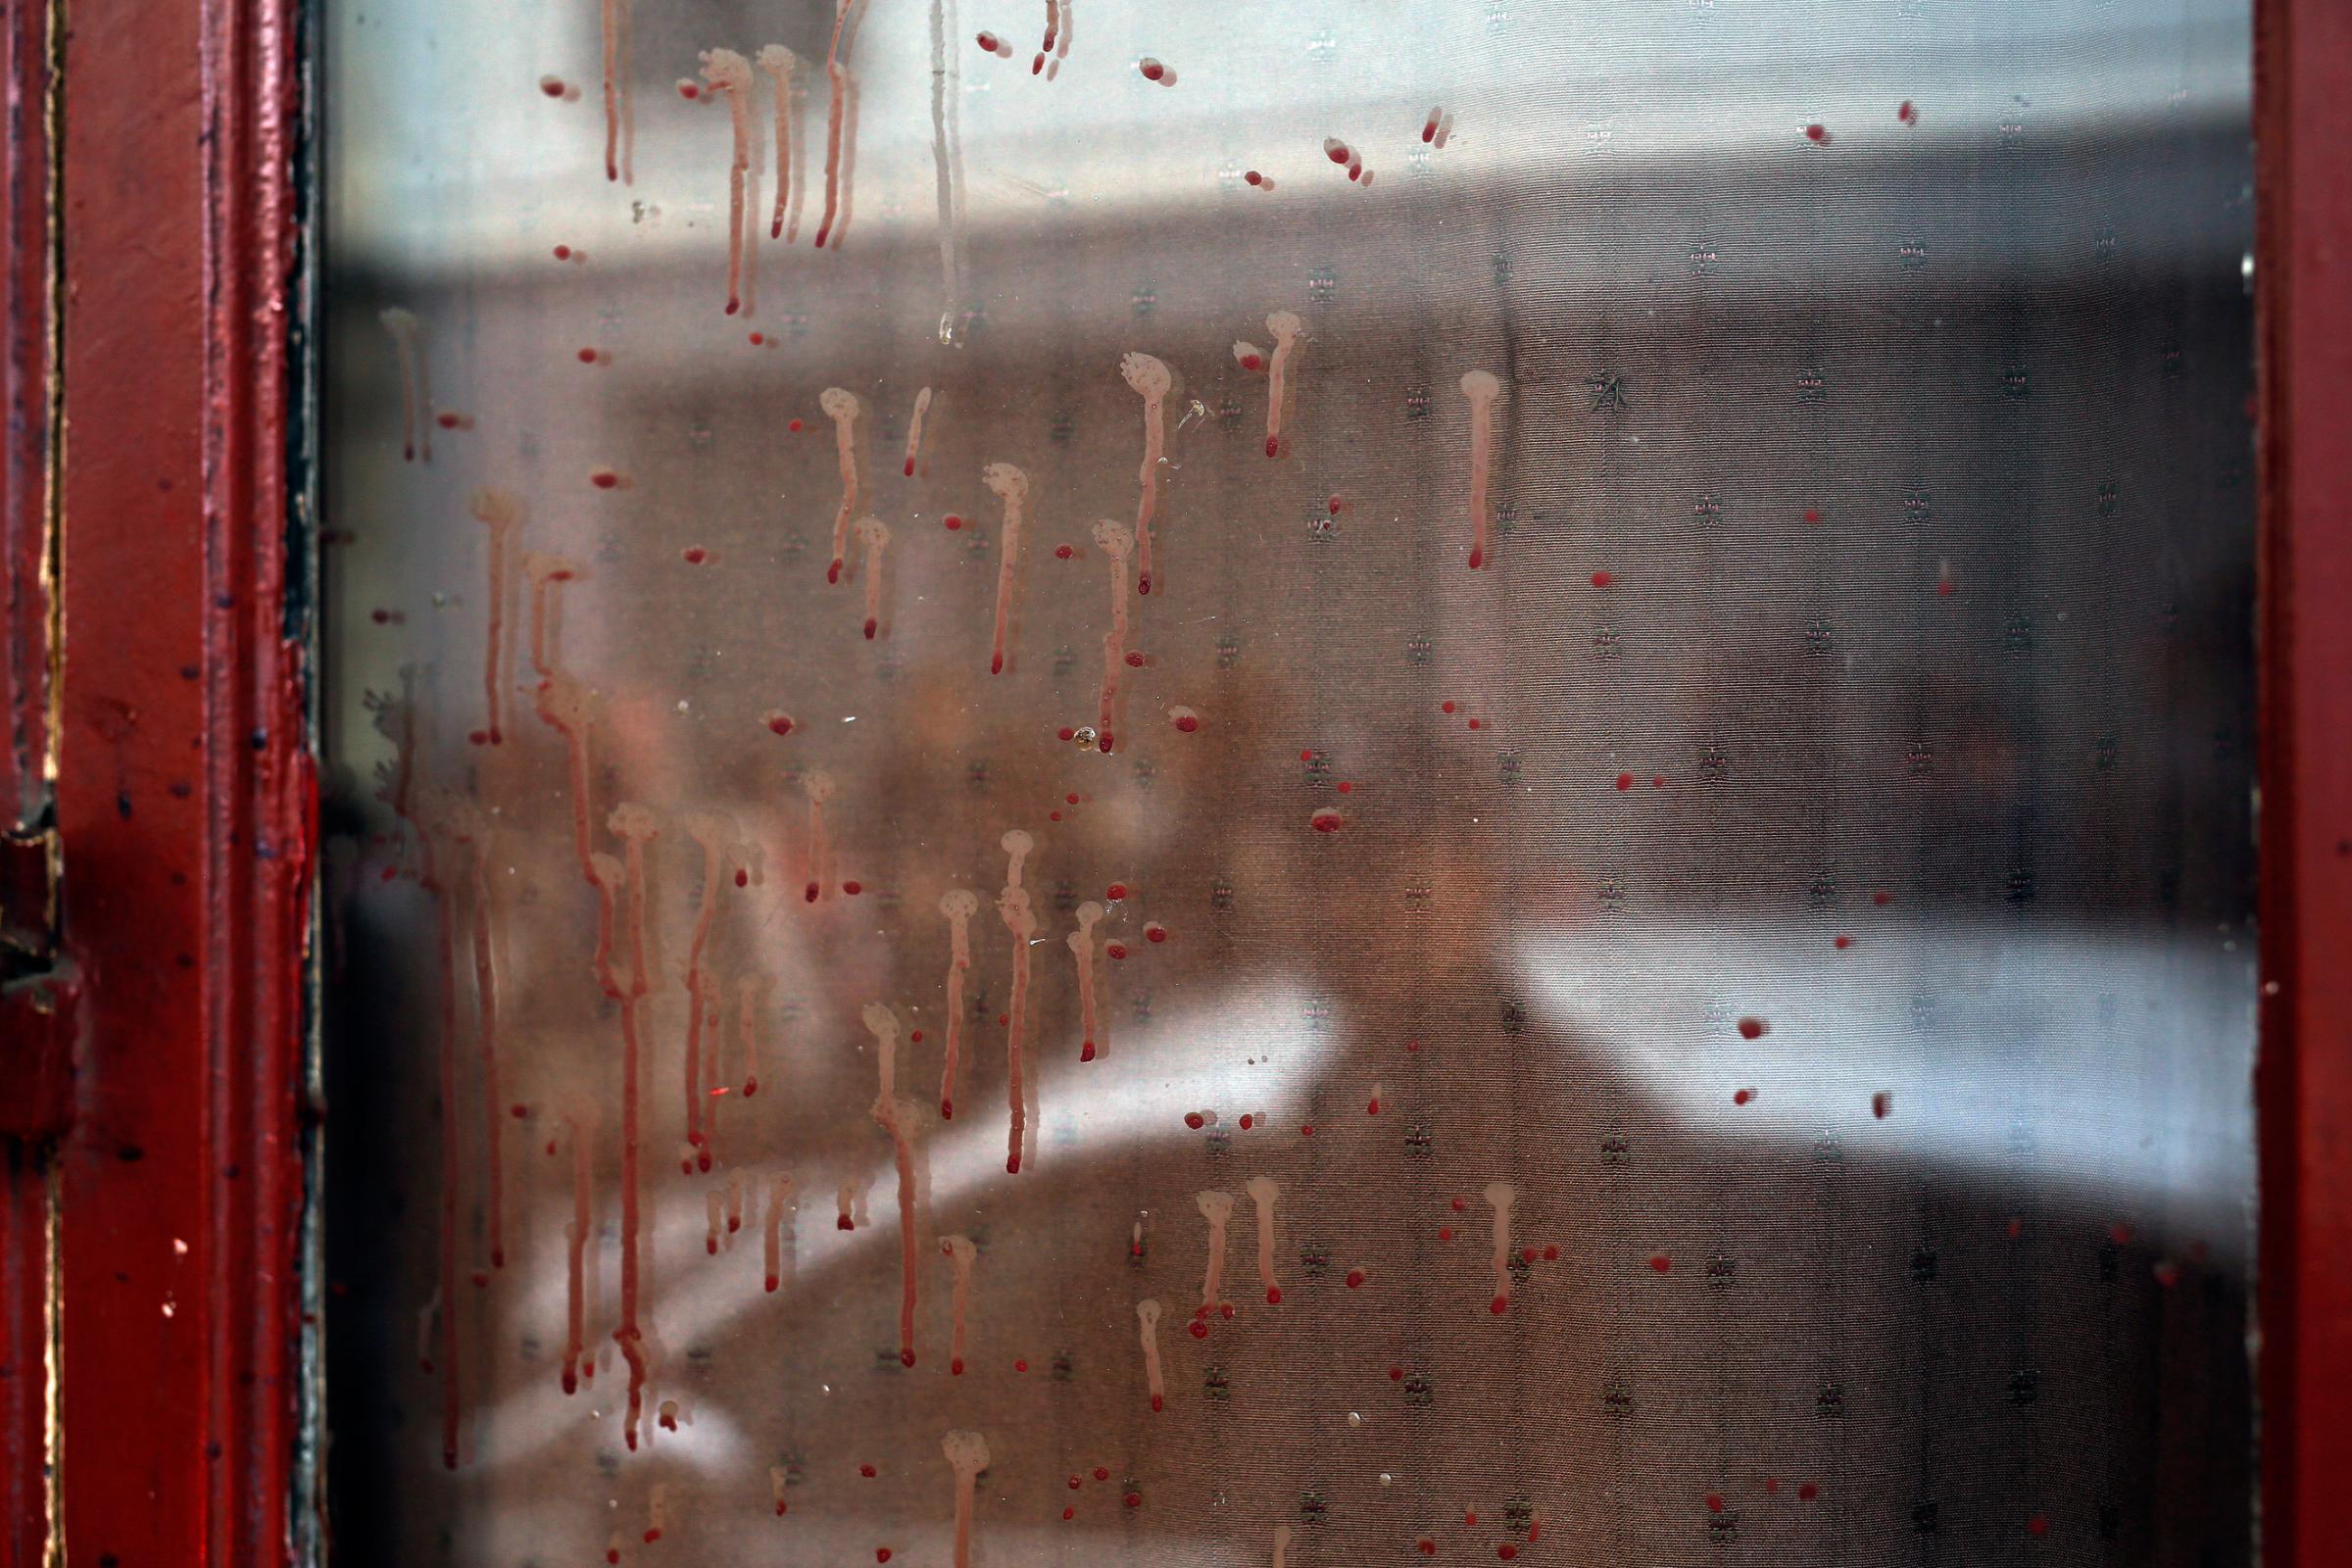 Dried blood on the window of the Carillon cafe in Paris on Nov. 14, 2015.